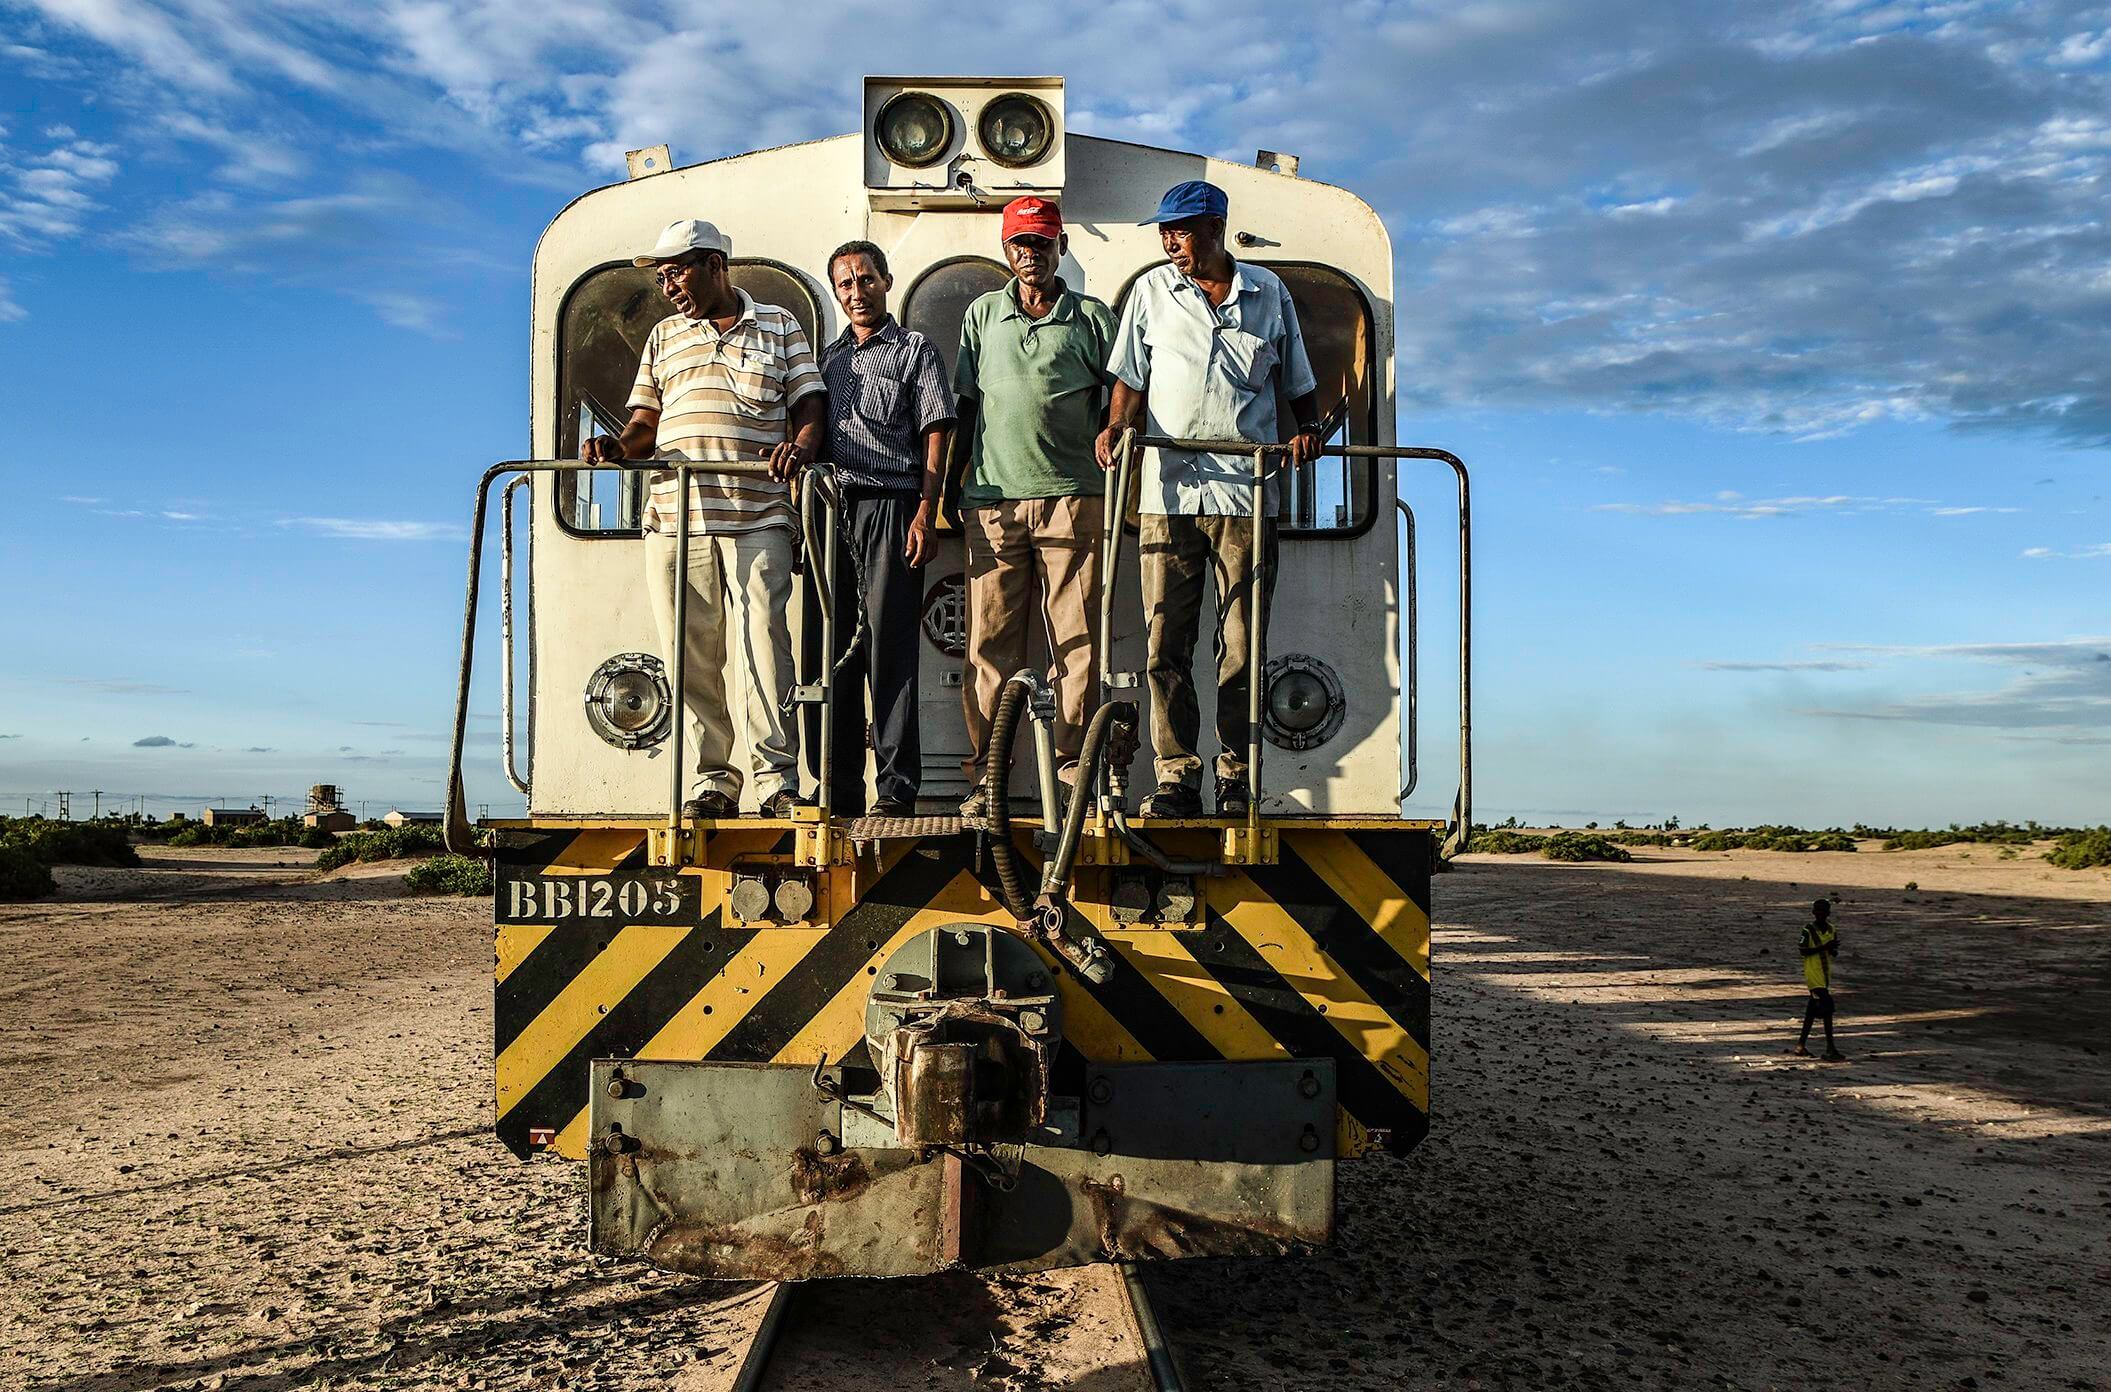 The train's drivers and mechanics pose during a stop in the desert, just before sunset